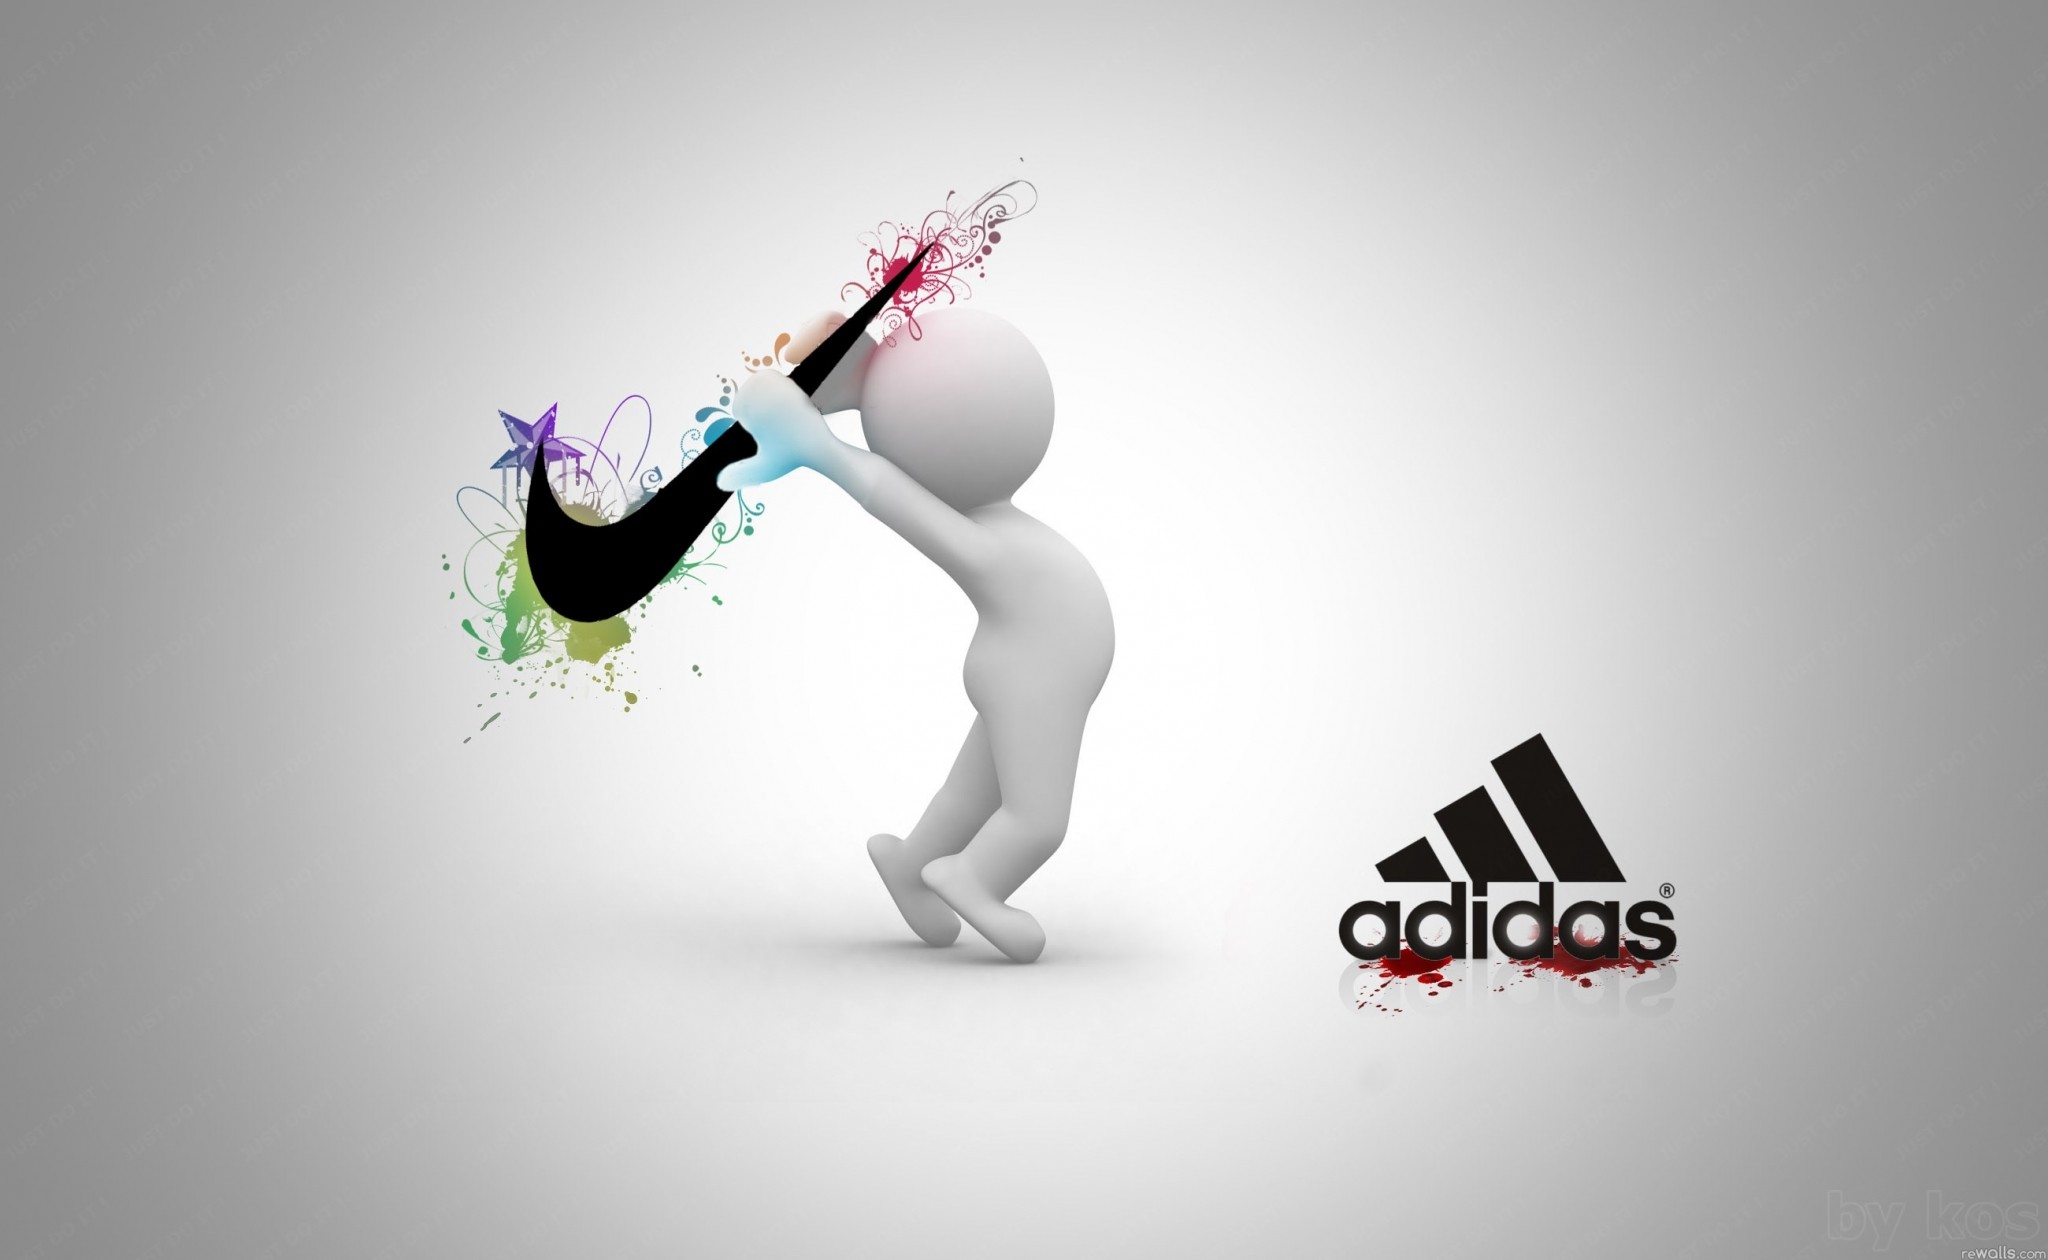 2048x1260 adidas backgrounds images